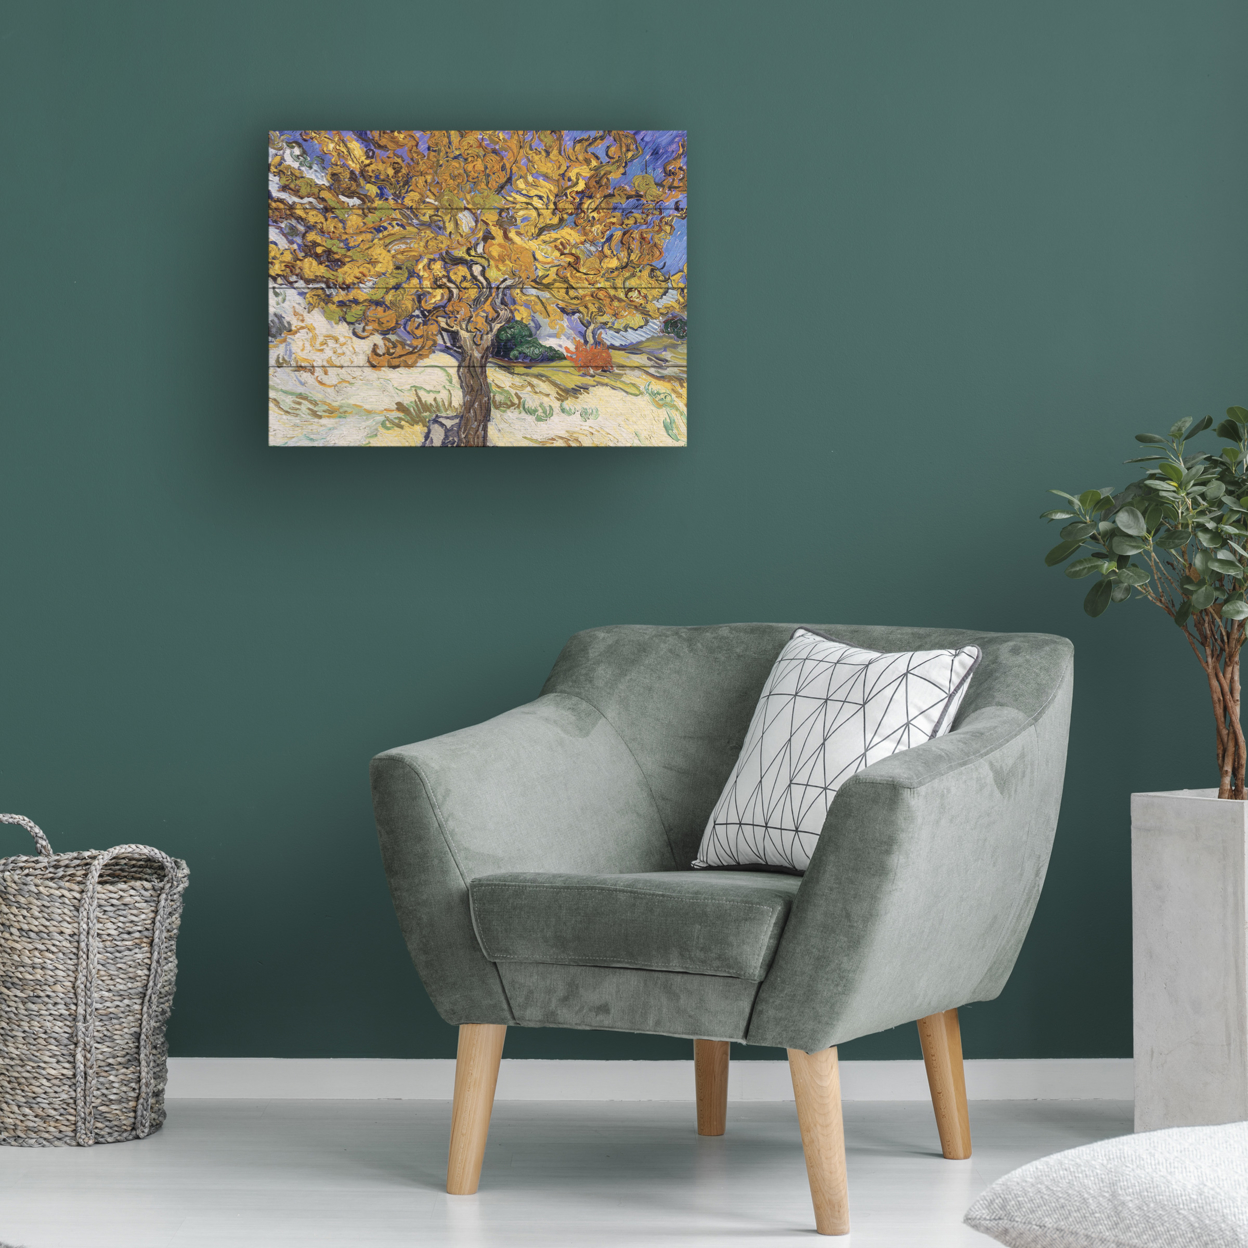 Wall Art 12 X 16 Inches Titled Mulberry Tree, 1889 Ready To Hang Printed On Wooden Planks